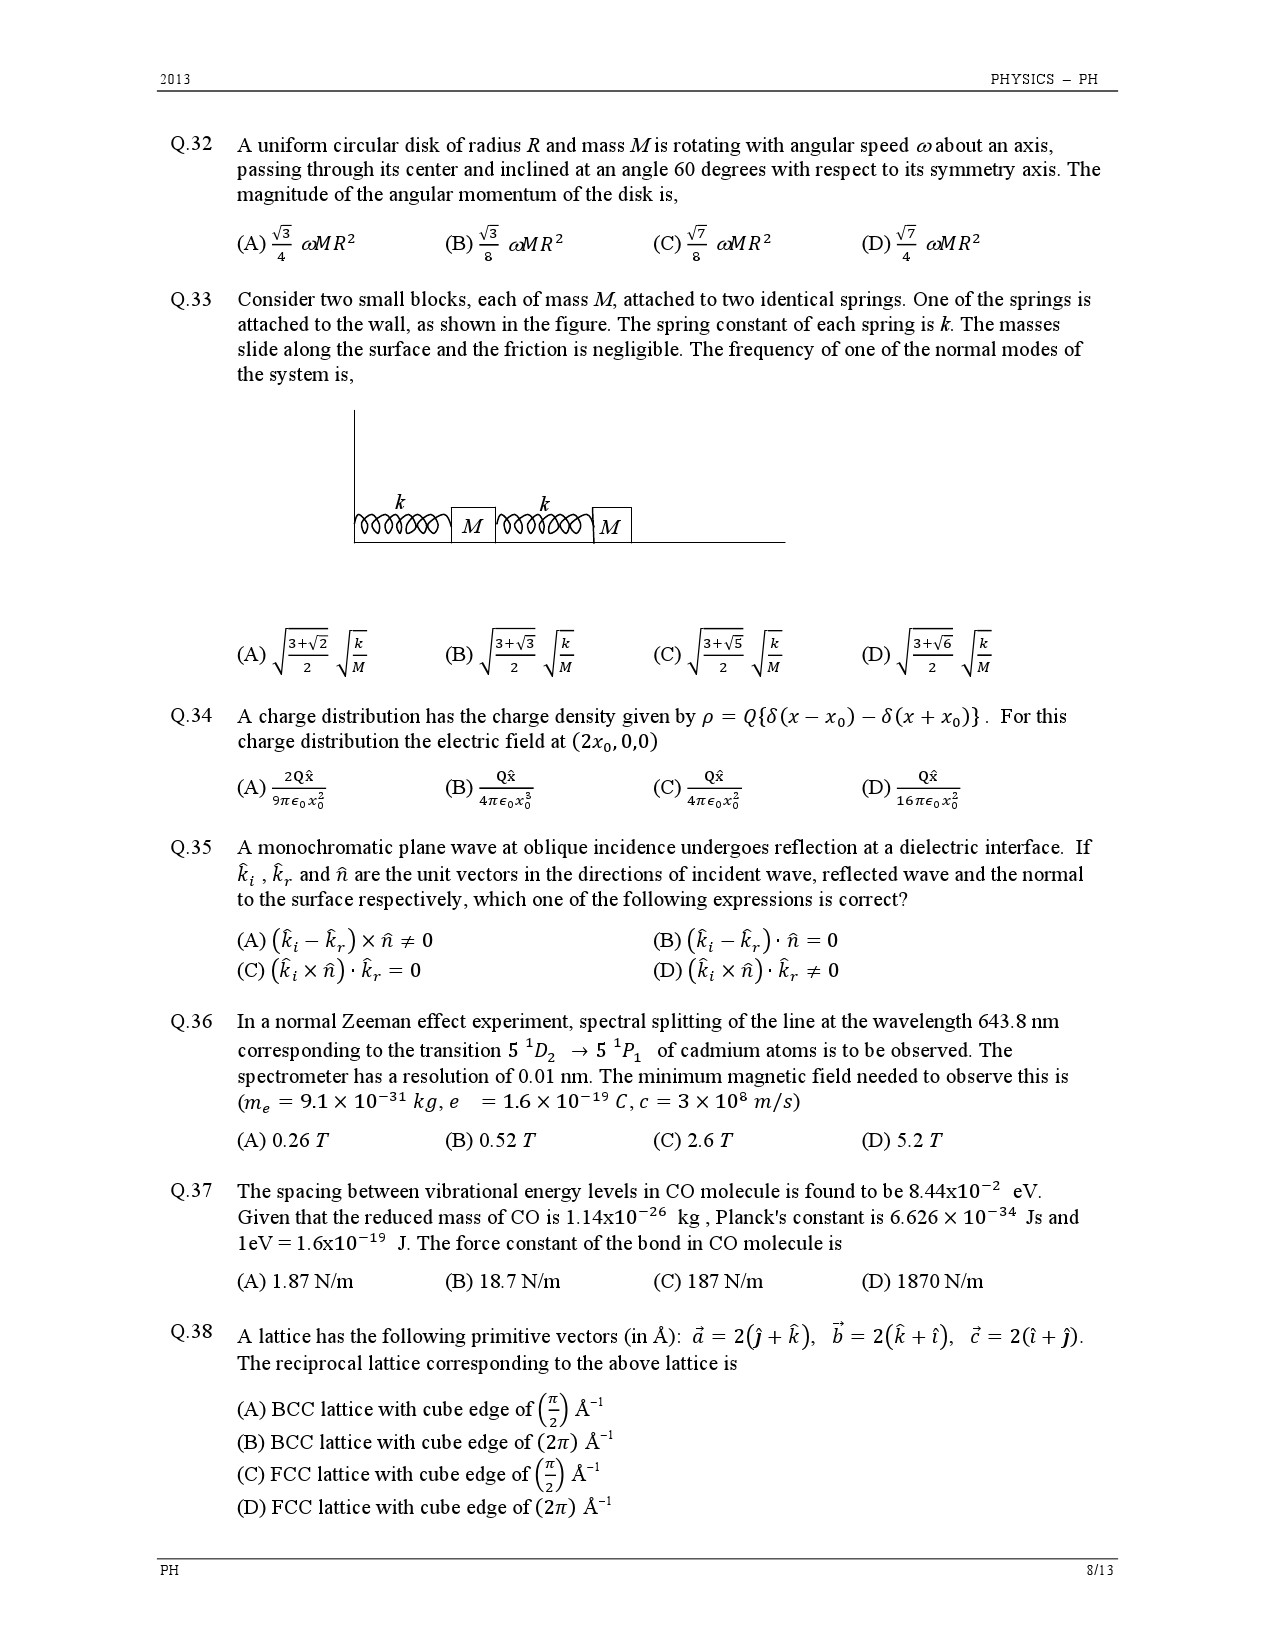 GATE Exam Question Paper 2013 Physics 8